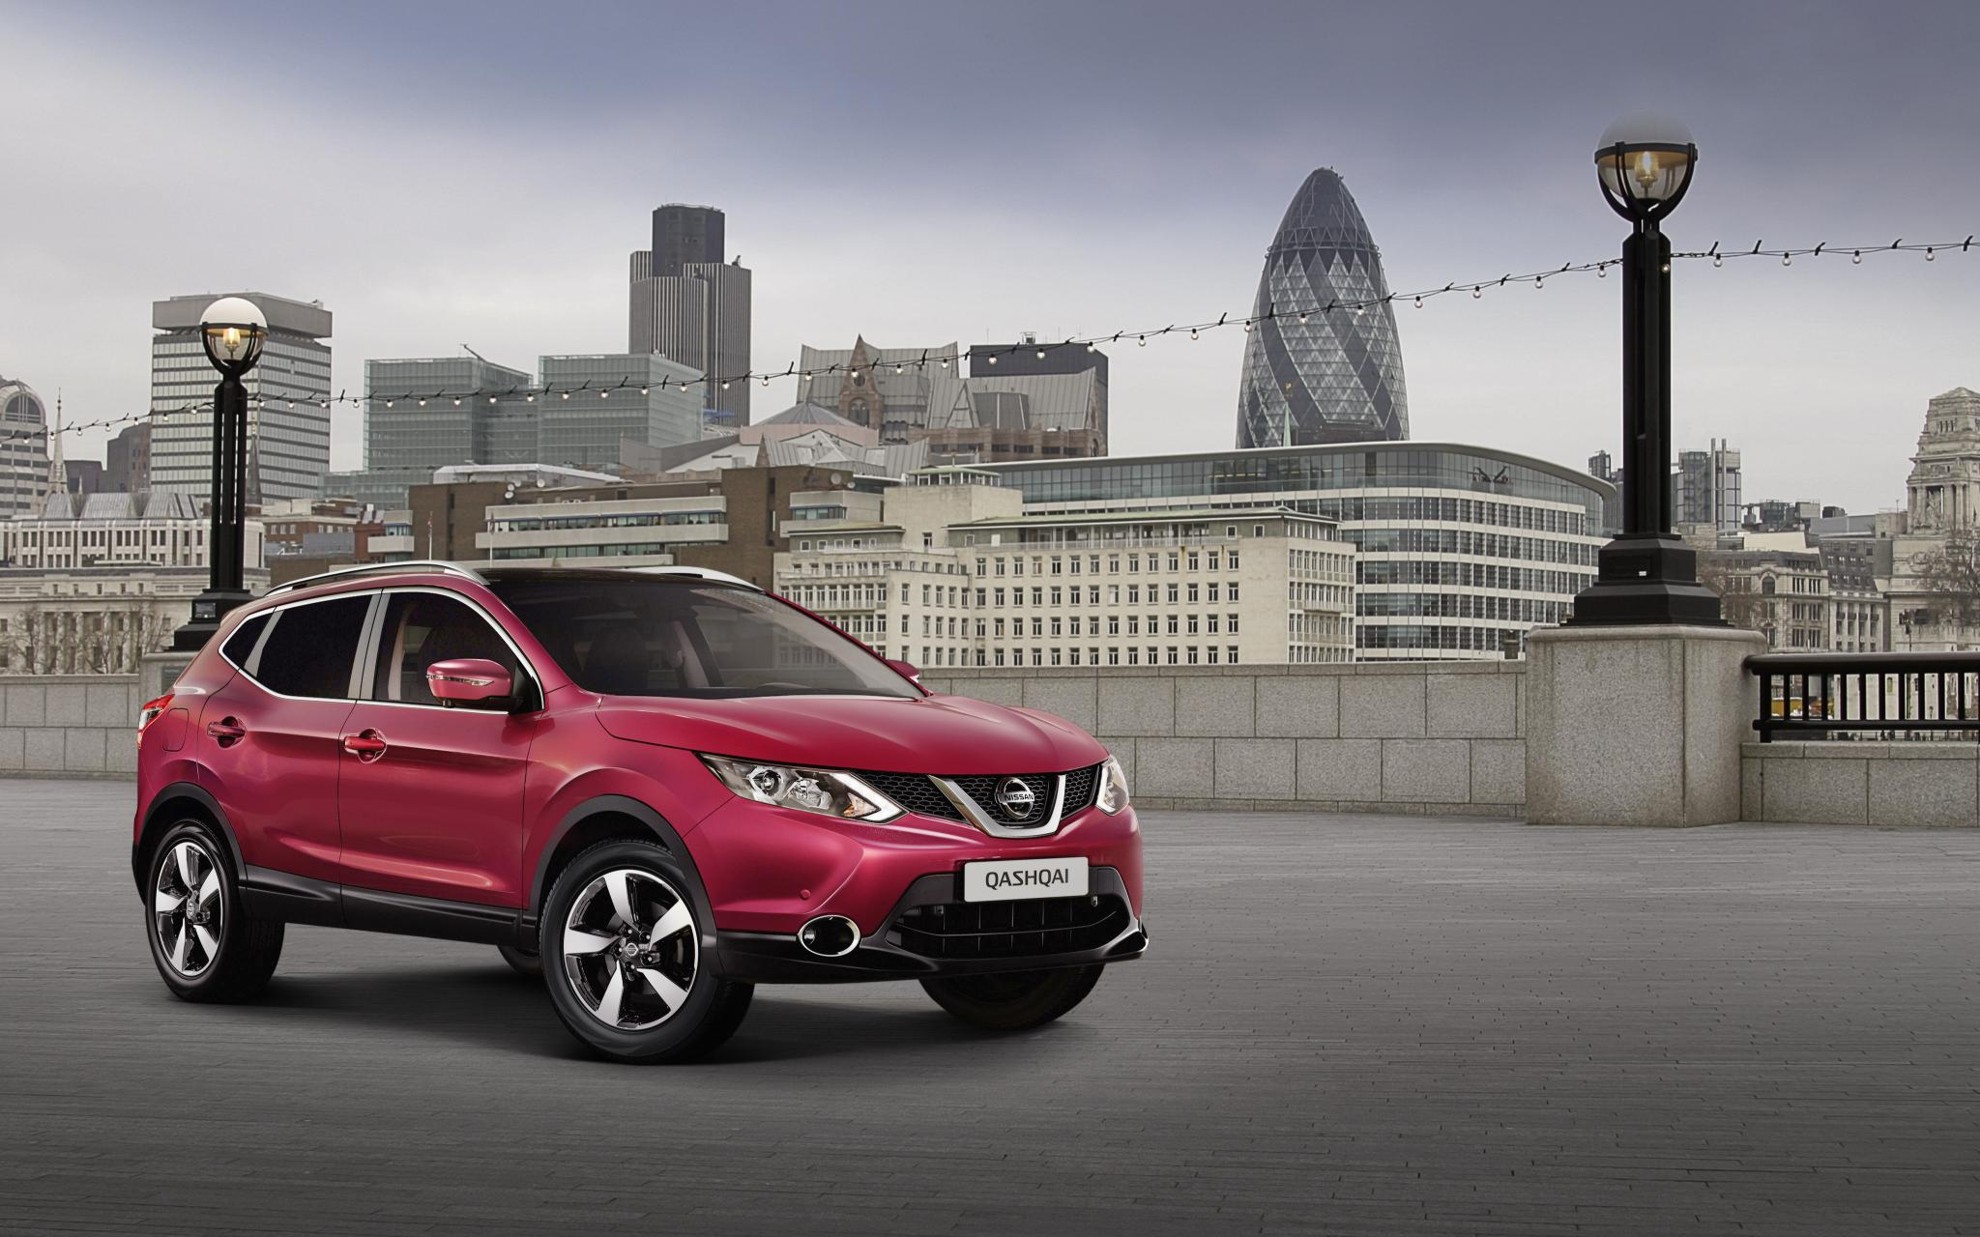 MORE SILVERWARE FOR QASHQAI AS RECOMBU.COM NAMES BEST-SELLING NISSAN CROSSOVER AS 2014 FAMILY CAR OF THE YEAR